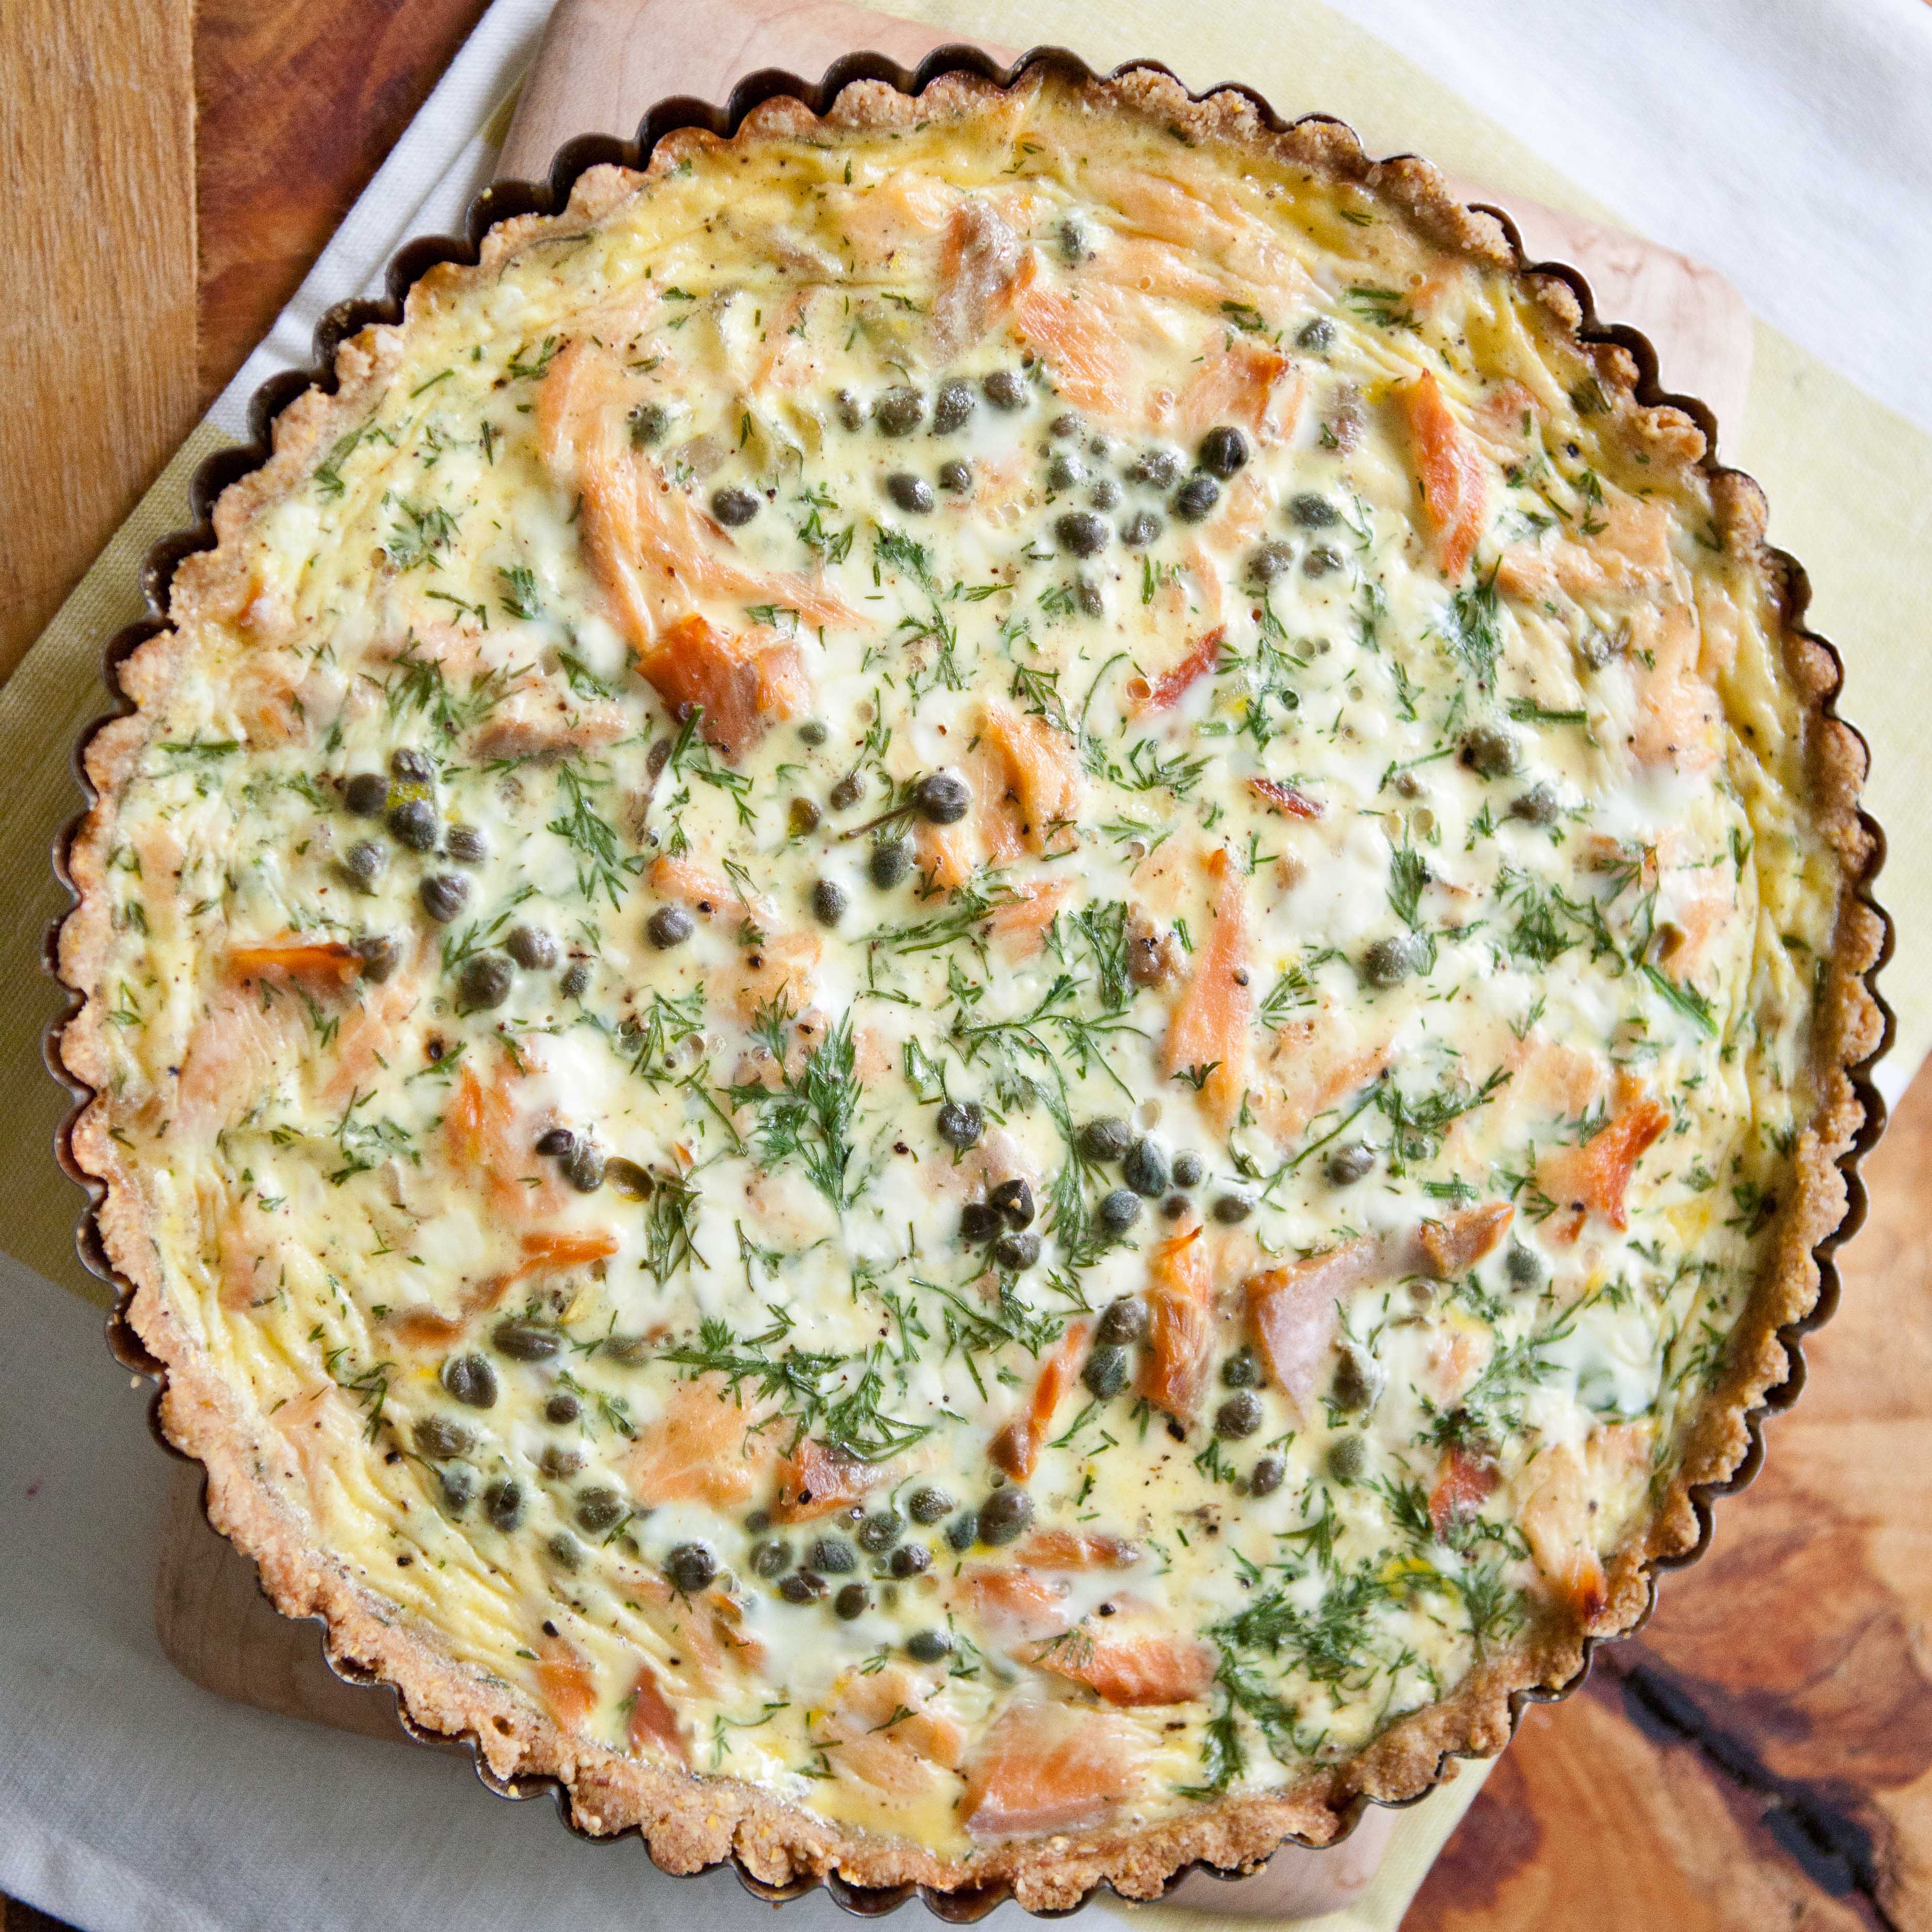 Smoked Salmon and Crème Fraîche Tart with a Cornmeal Millet Crust